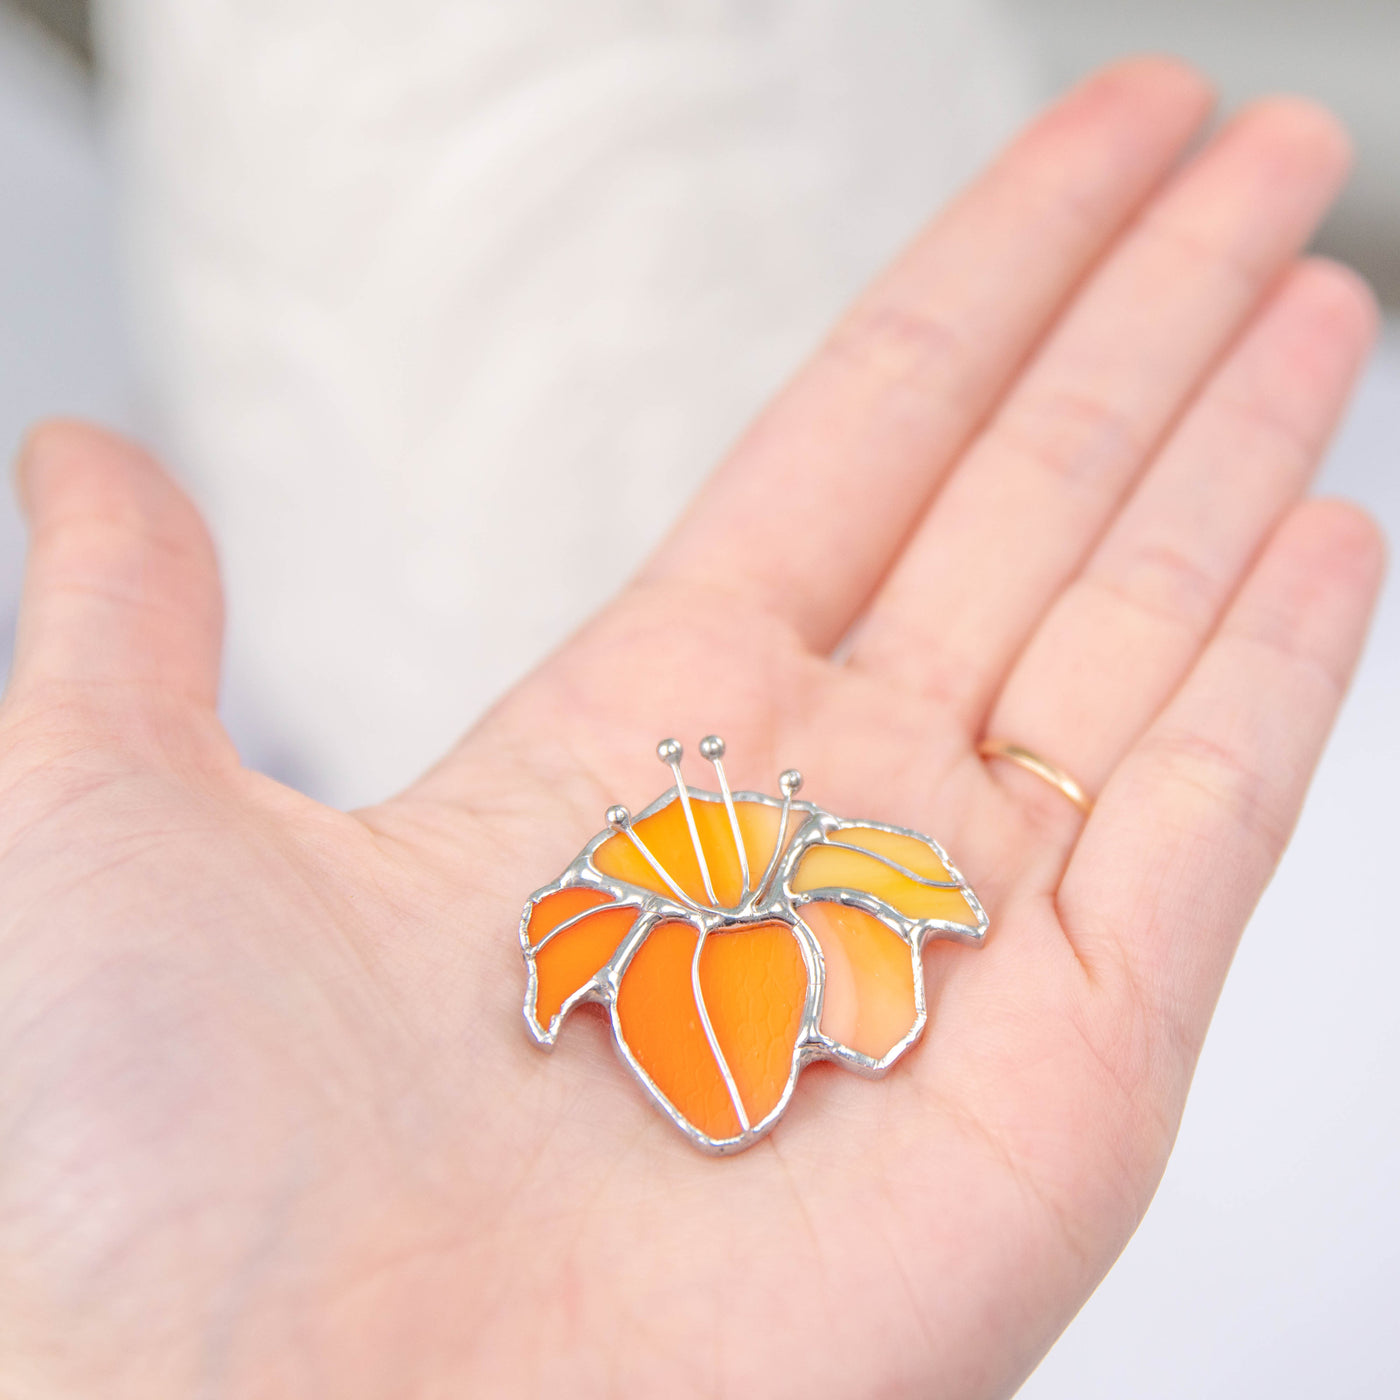 Orange lily pin of stained glass